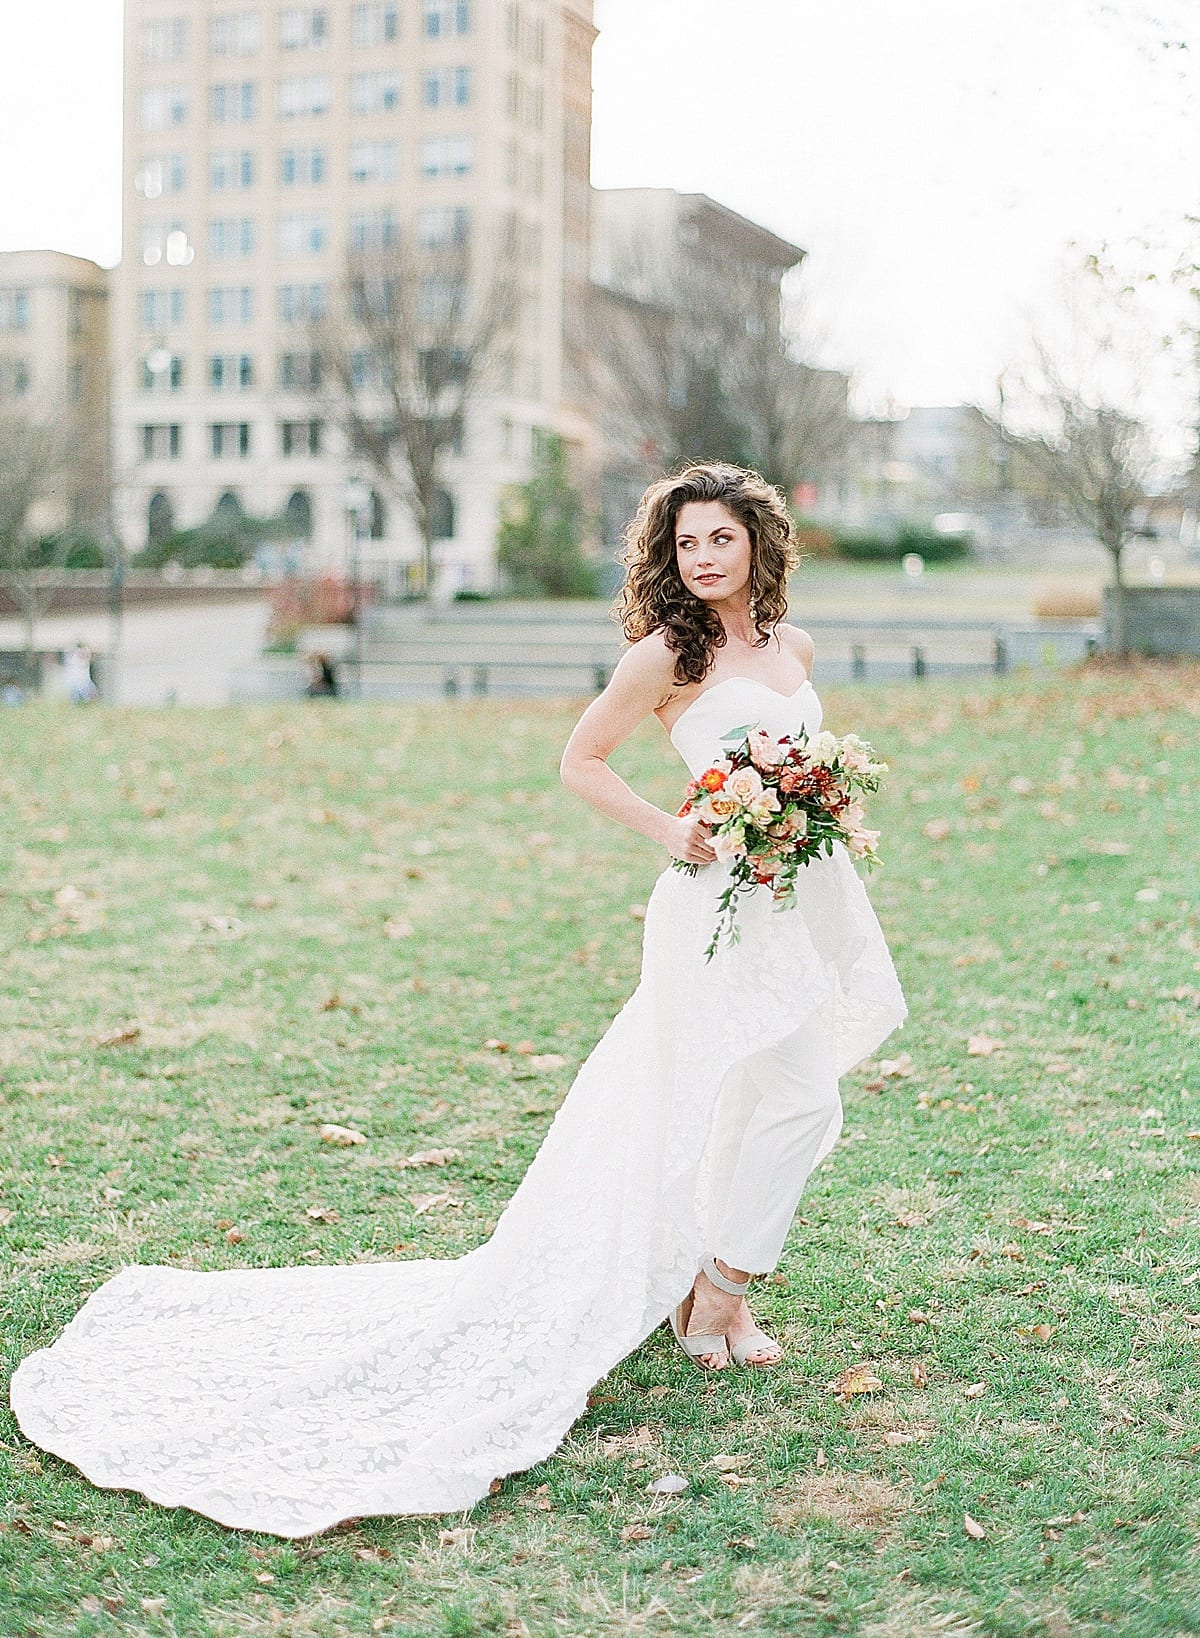 Bride Looking Off Holding Bouquet in Park Photo